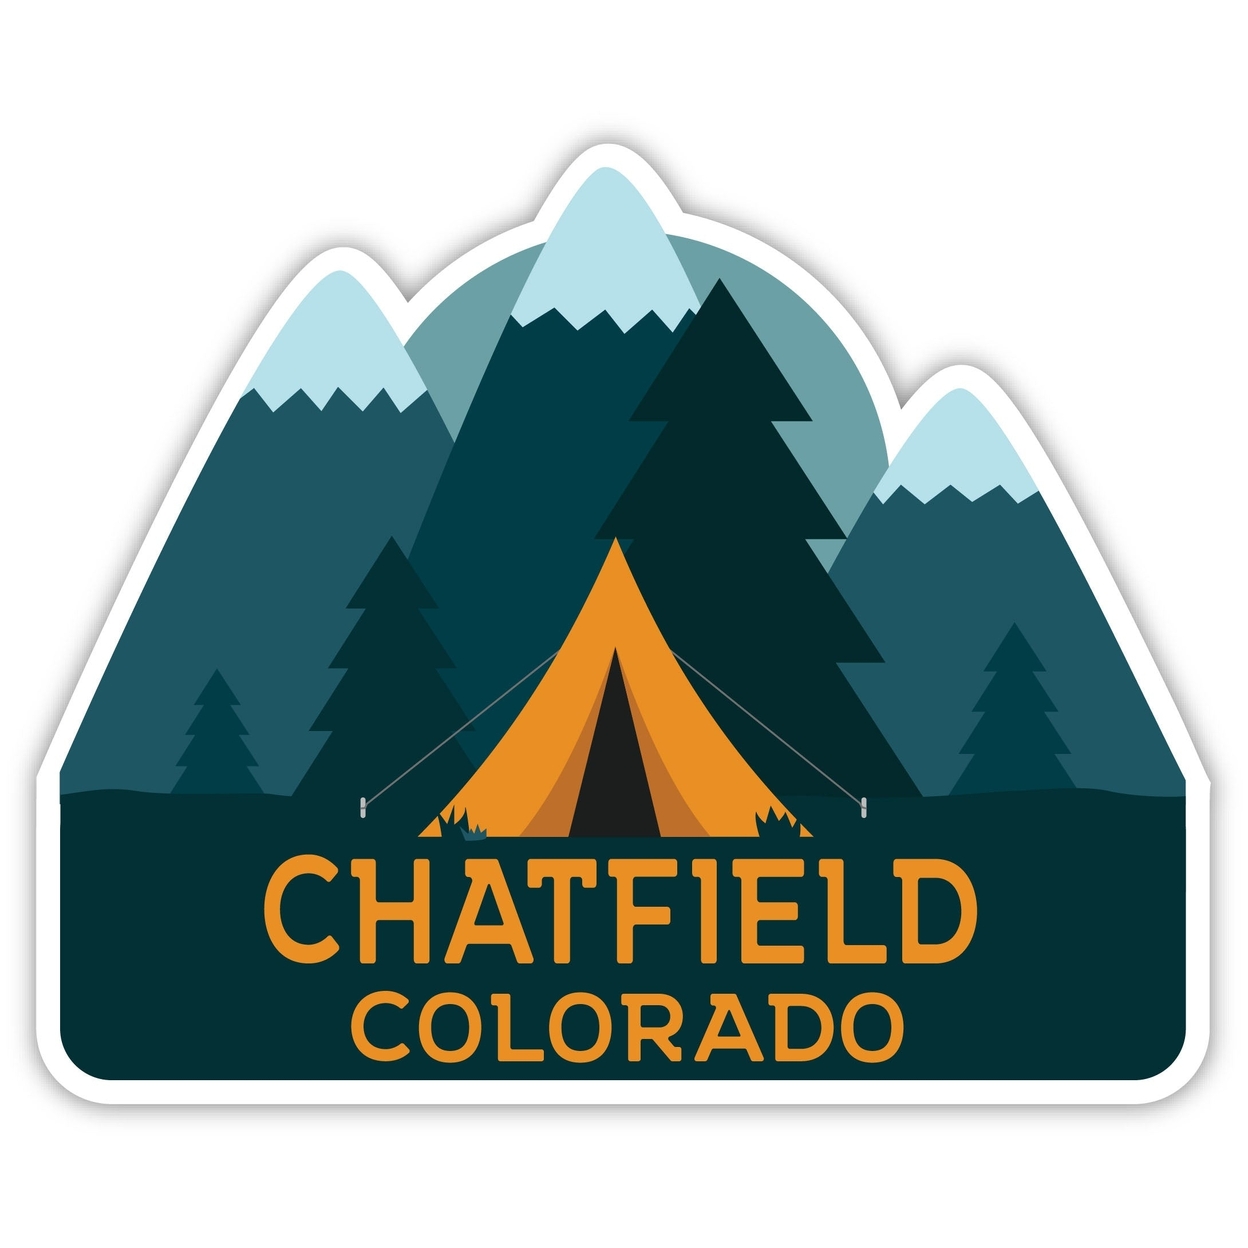 Chatfield Colorado Souvenir Decorative Stickers (Choose Theme And Size) - 4-Pack, 6-Inch, Tent